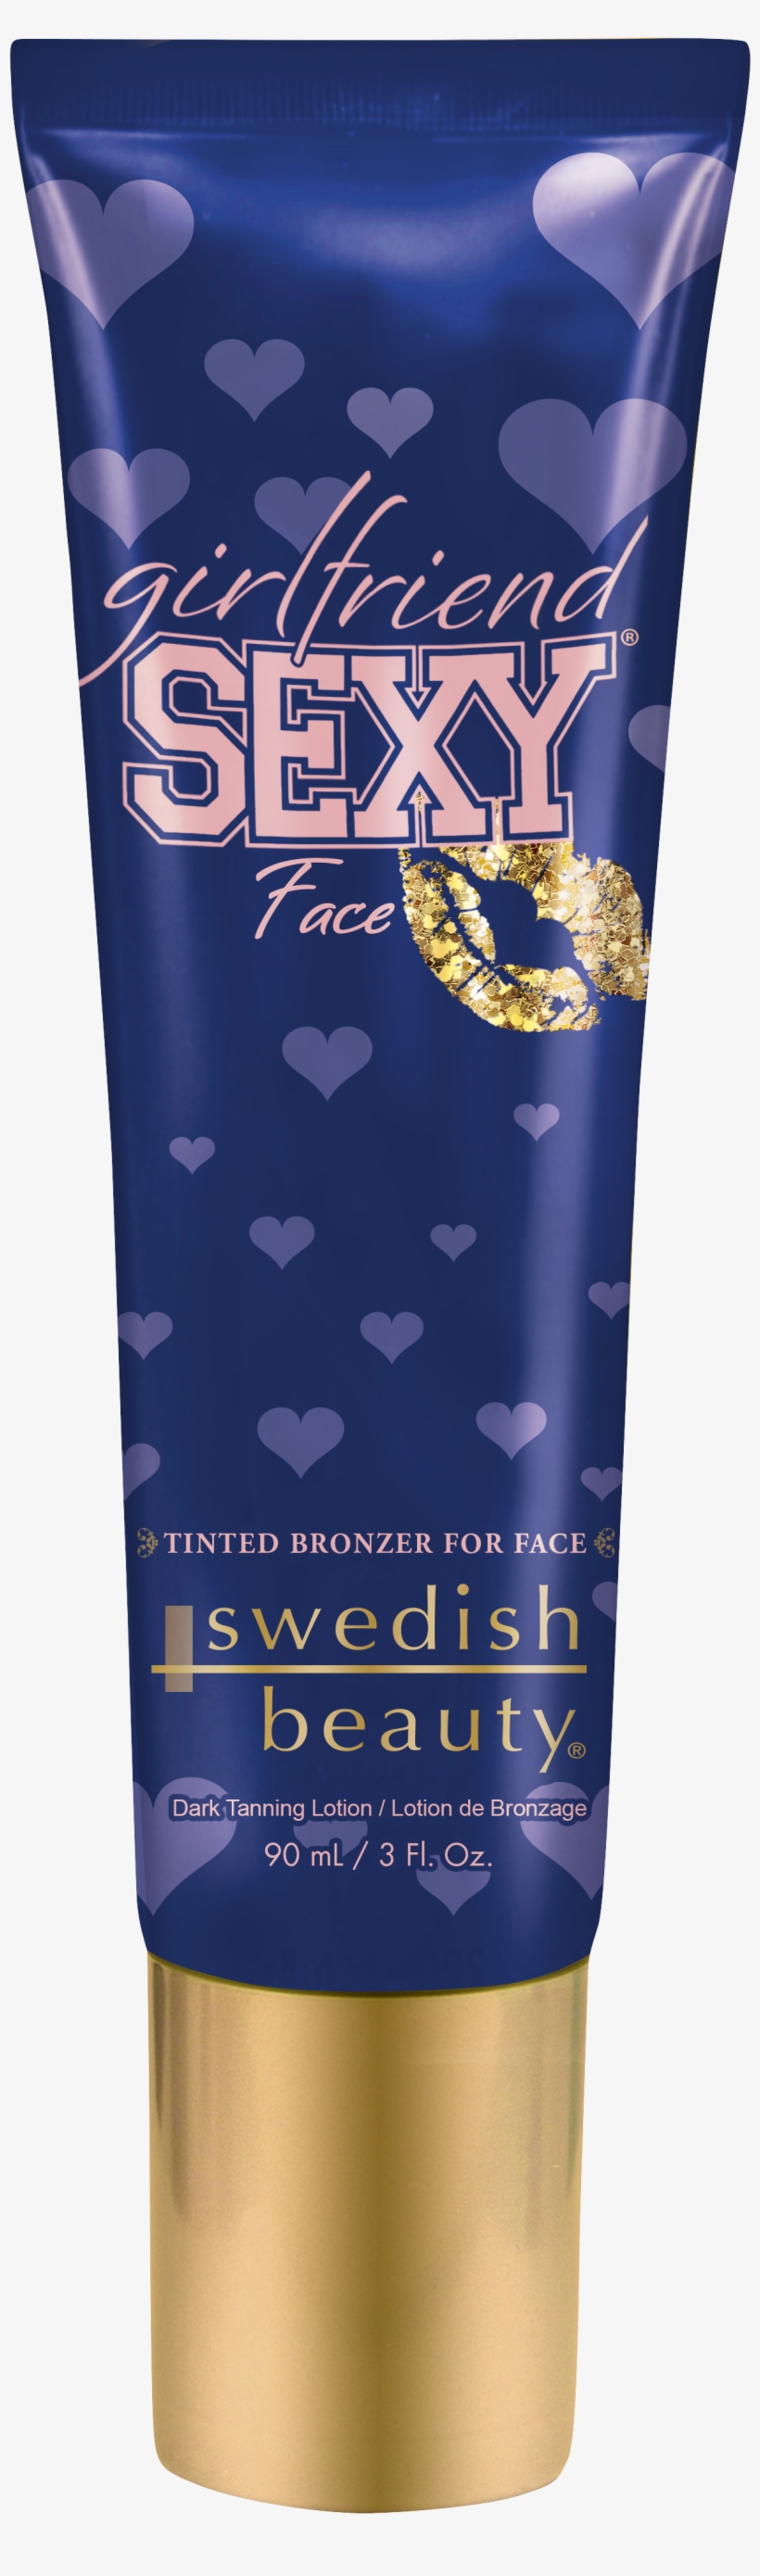 Swedish Beauty Girlfriend Sexy Face Tinted Bronzer - Swedish Beauty Girlfriend Sexy Face Packet, transparent png #6318073